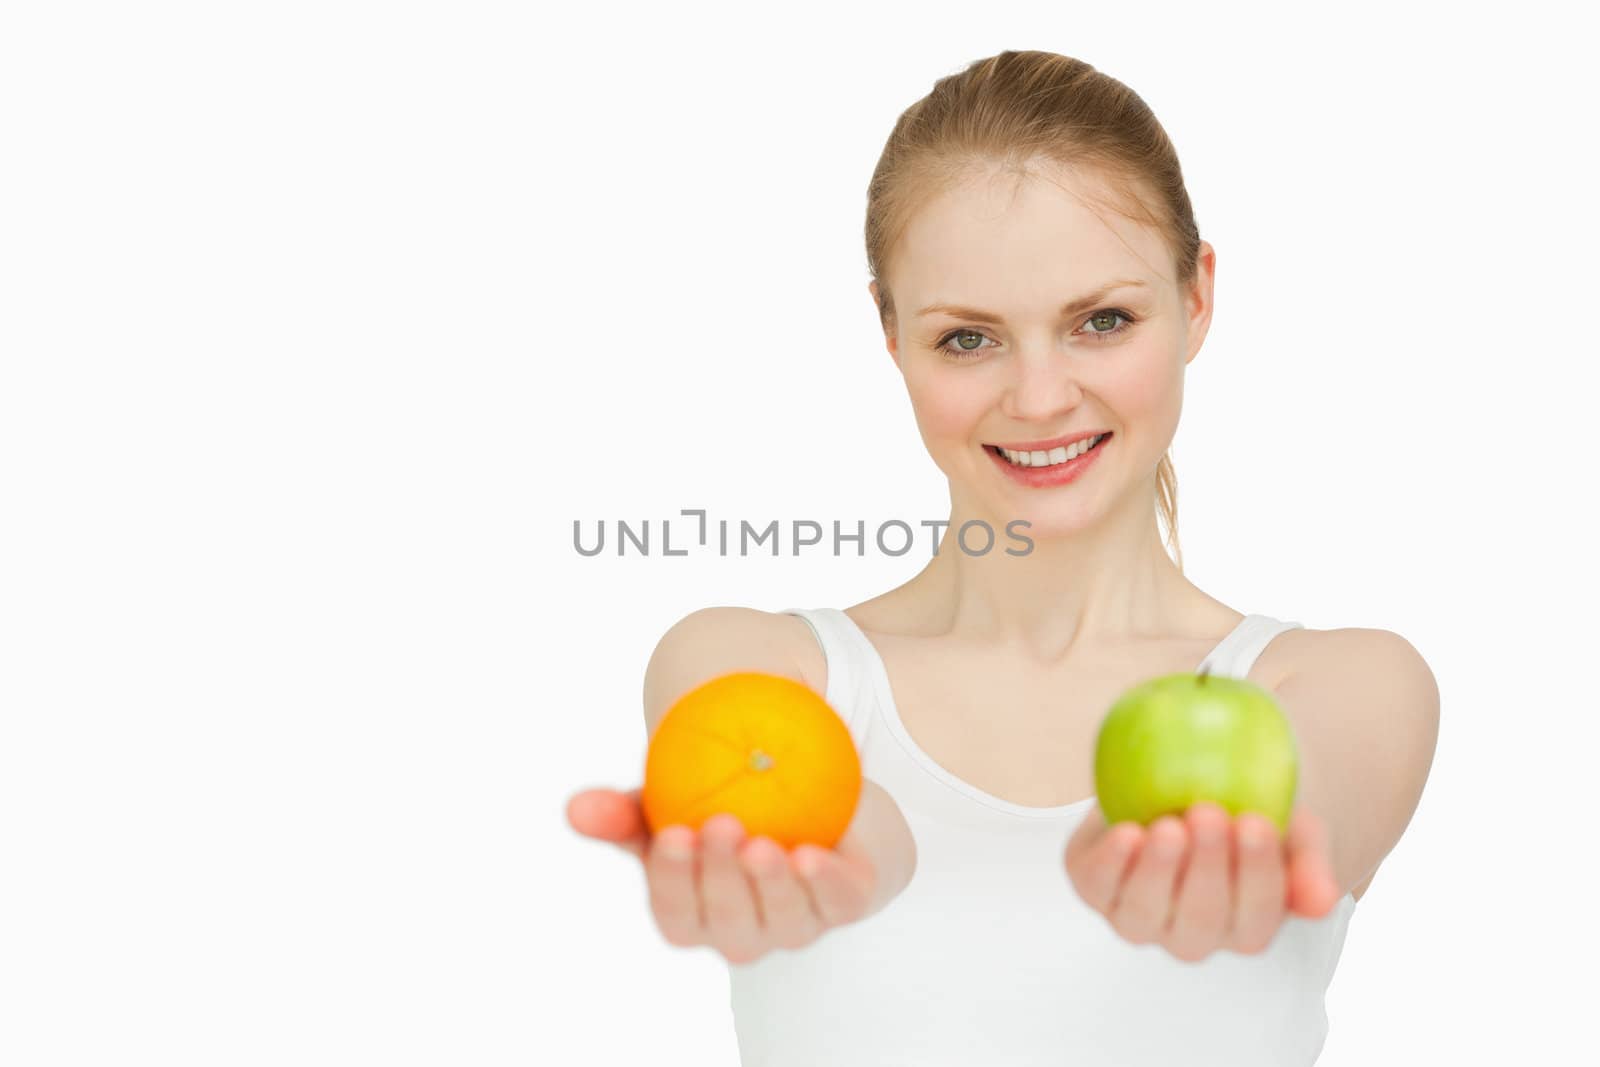 Young woman smiling while presenting fruits against white background